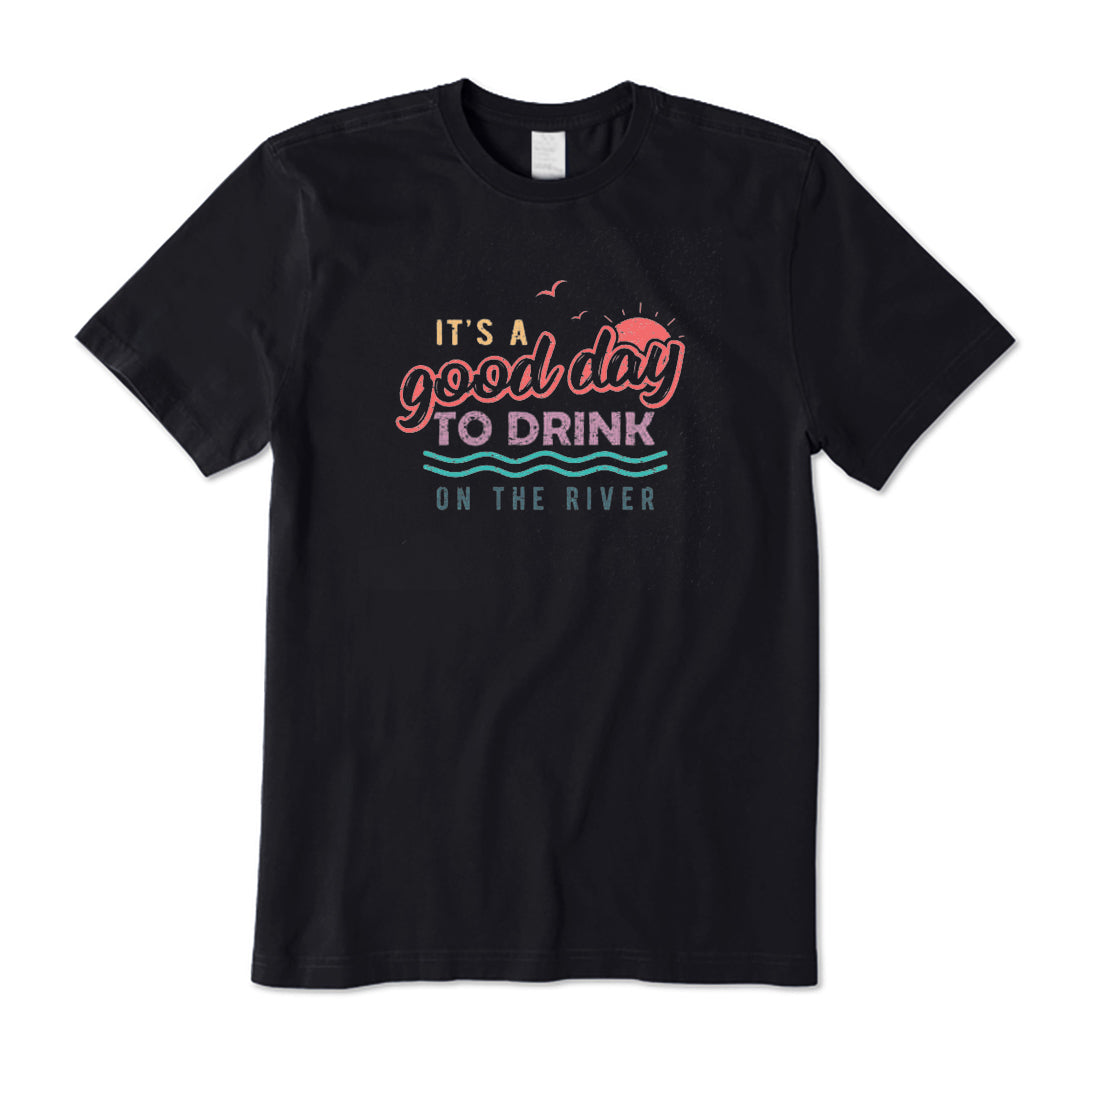 It's A Good Day To Drink On The River T-Shirt